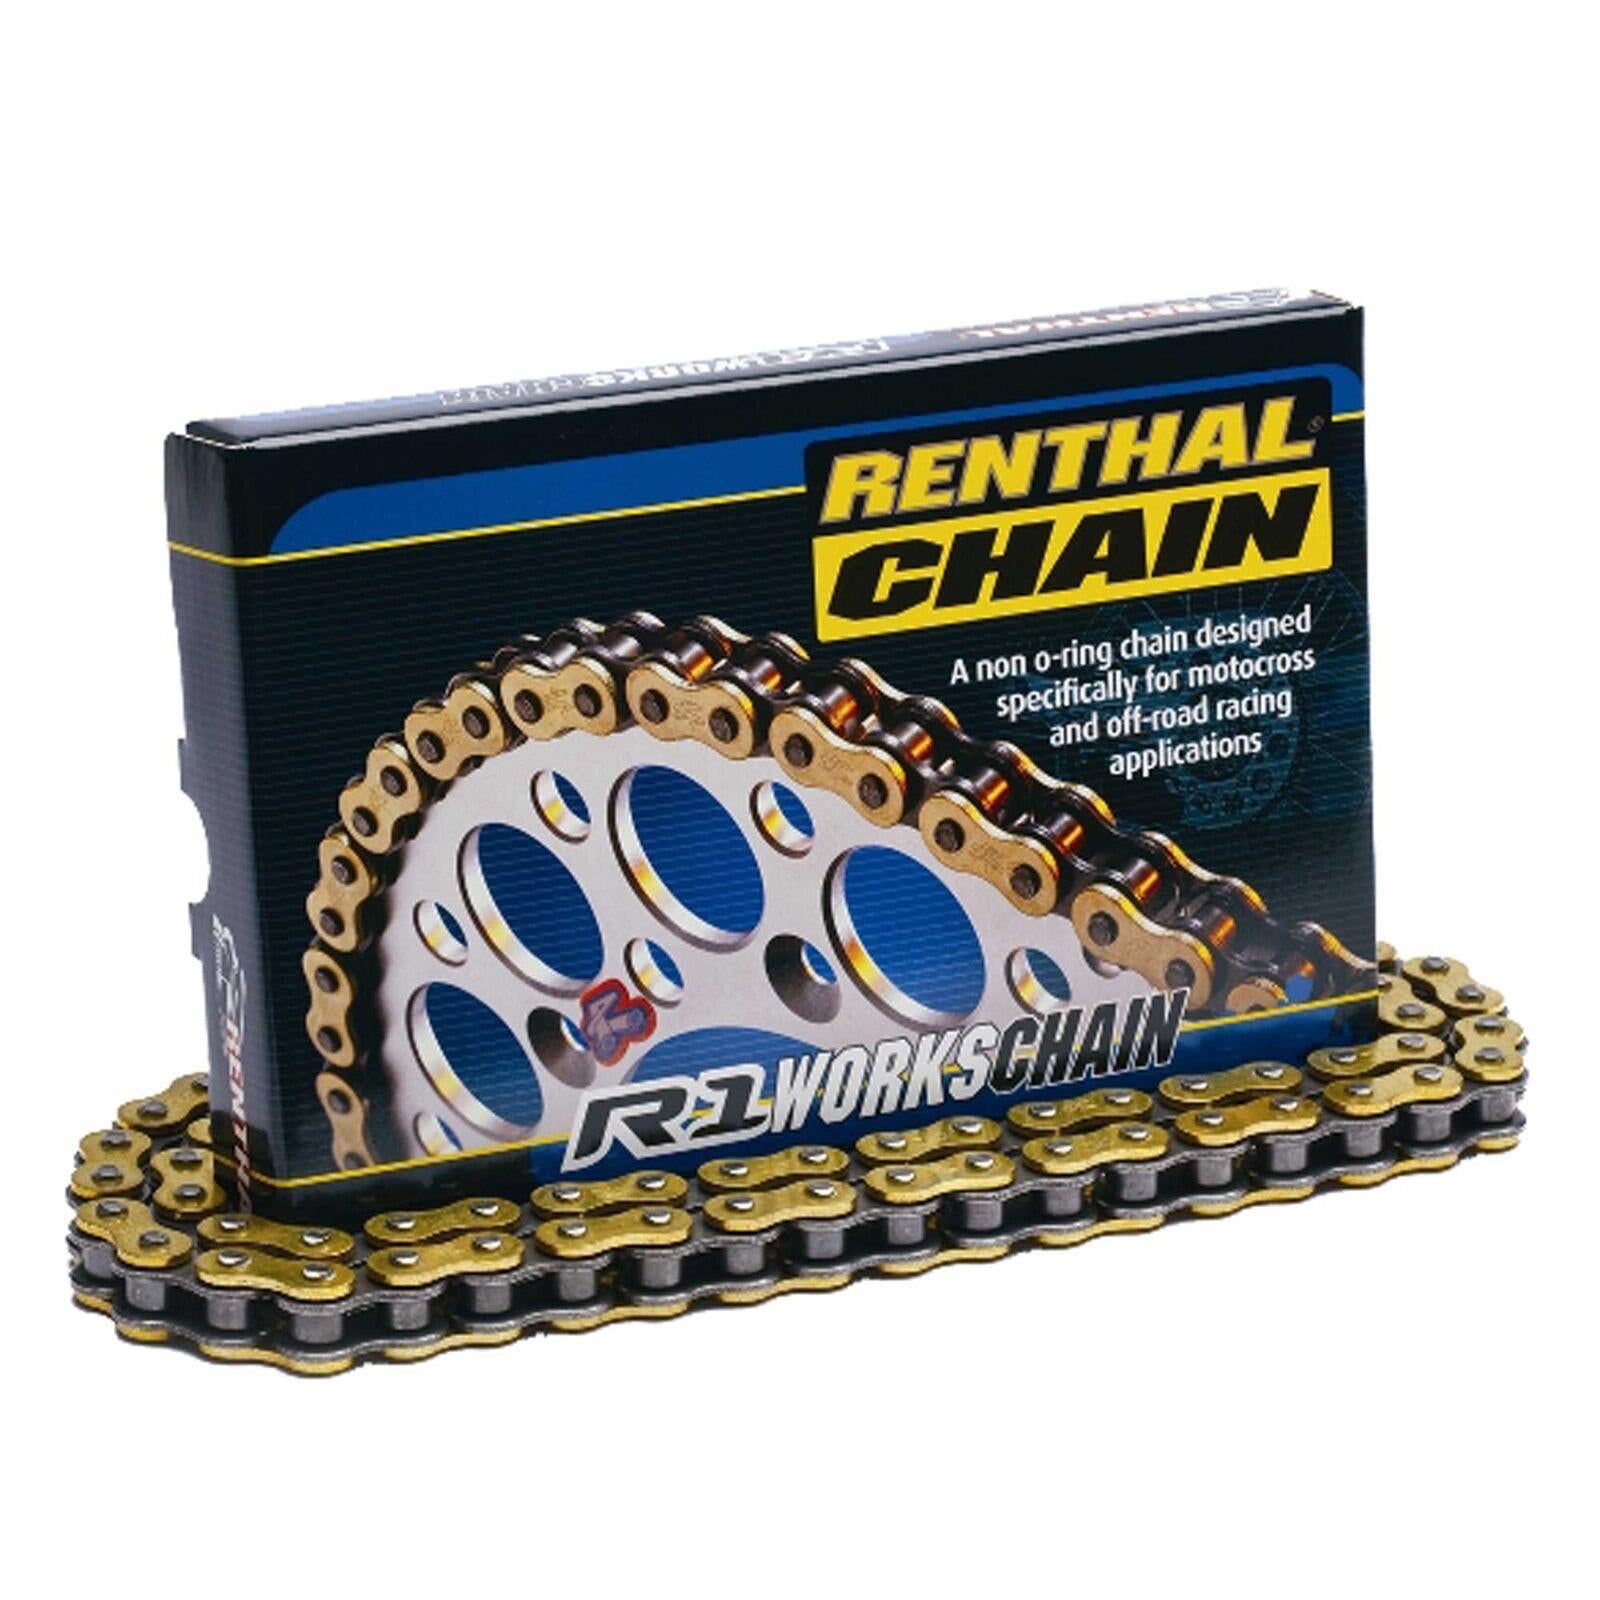 Renthal Works 428 R1 134L Chain MX Motorcycle Motocross Enduro Drive Chain New